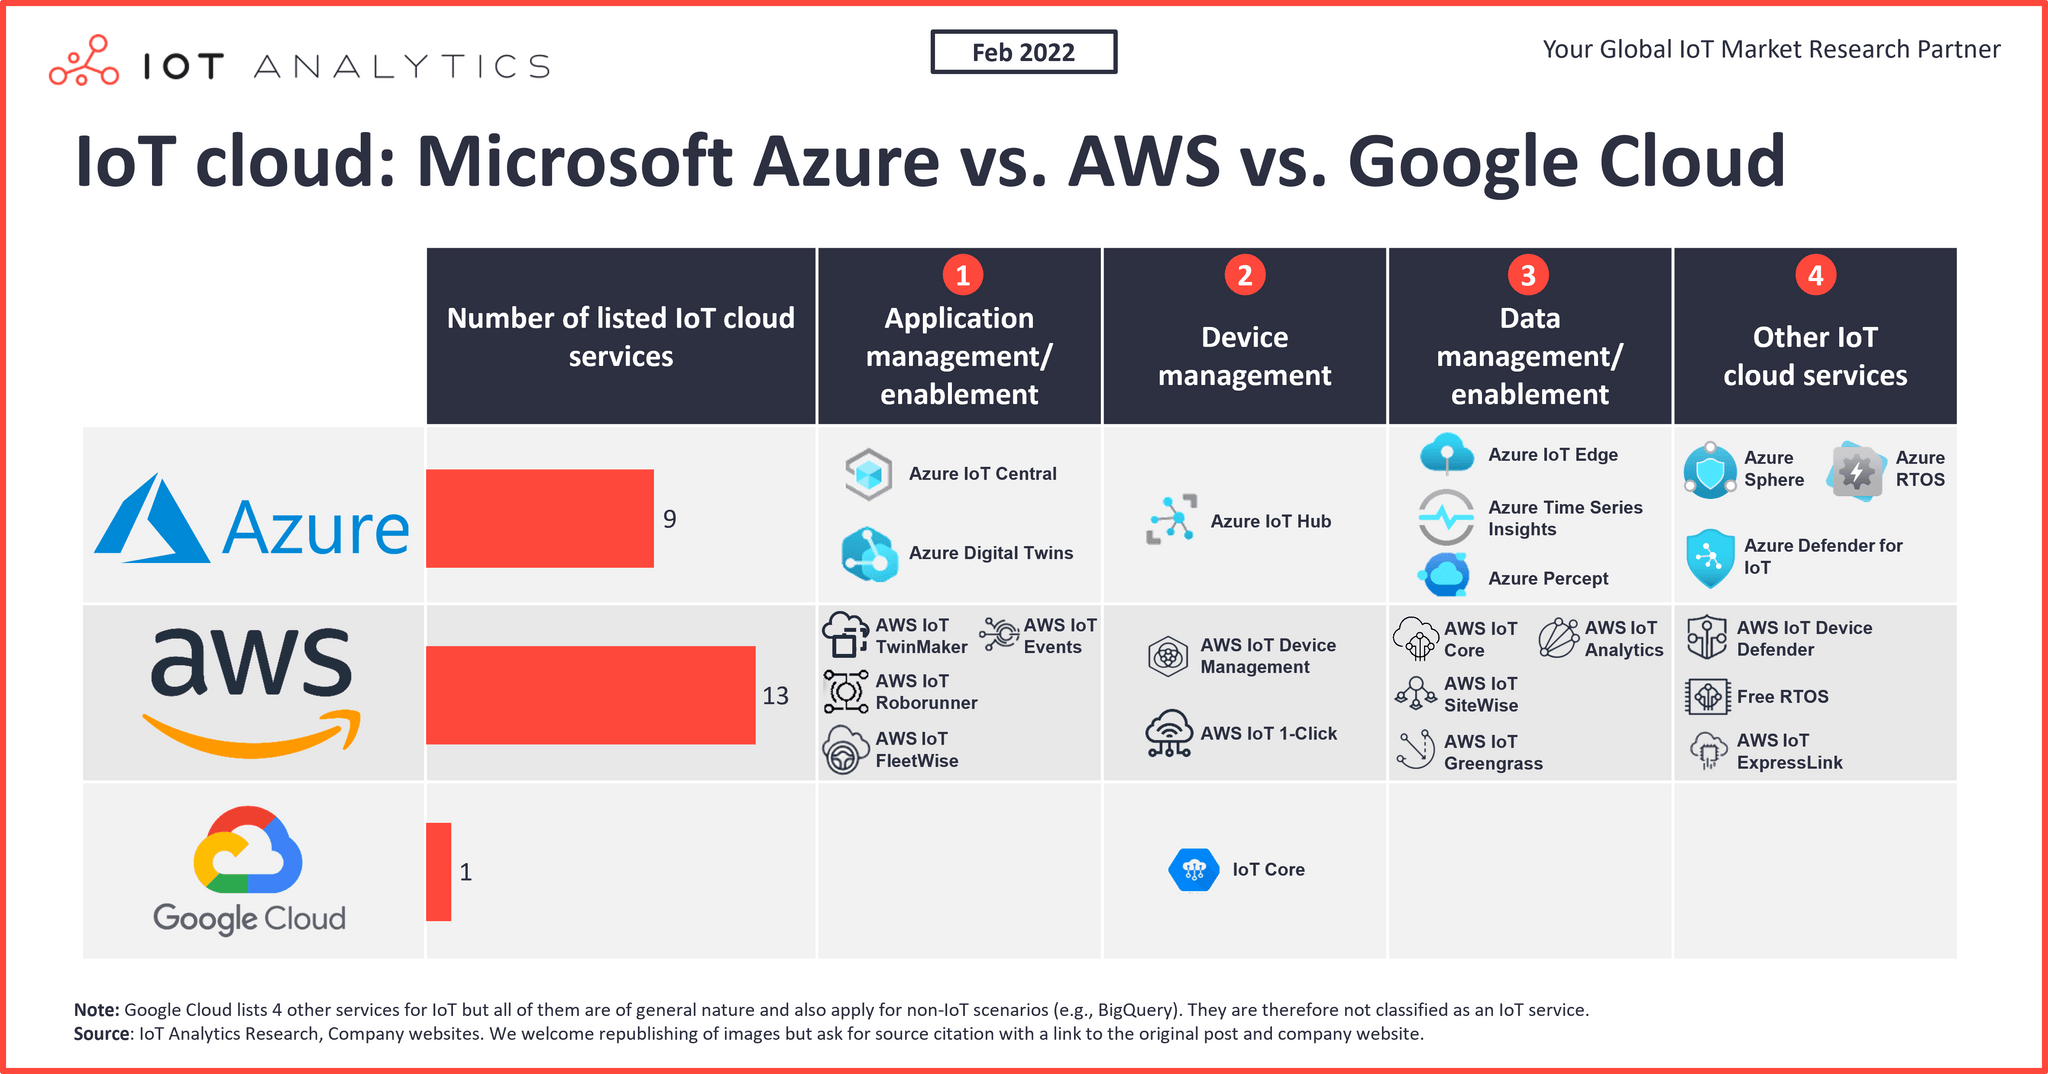 microsoft azure vs google cloud: What You Need to Know Before Buying